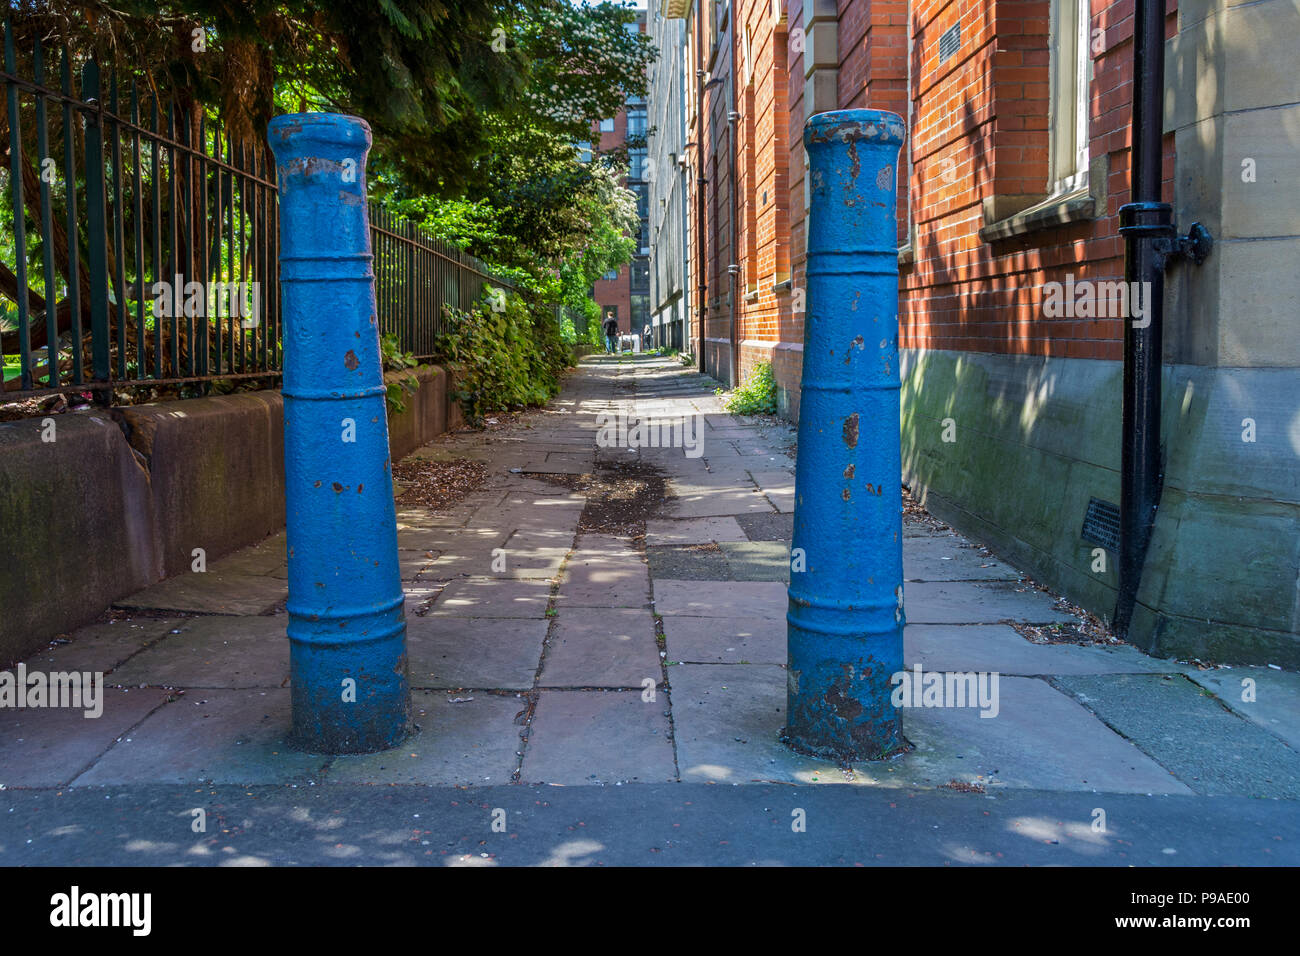 Two early 19th century cast iron cannon barrels used as bollards, St. John's Passage, Manchester, England, UK.  Grade II listed. Stock Photo